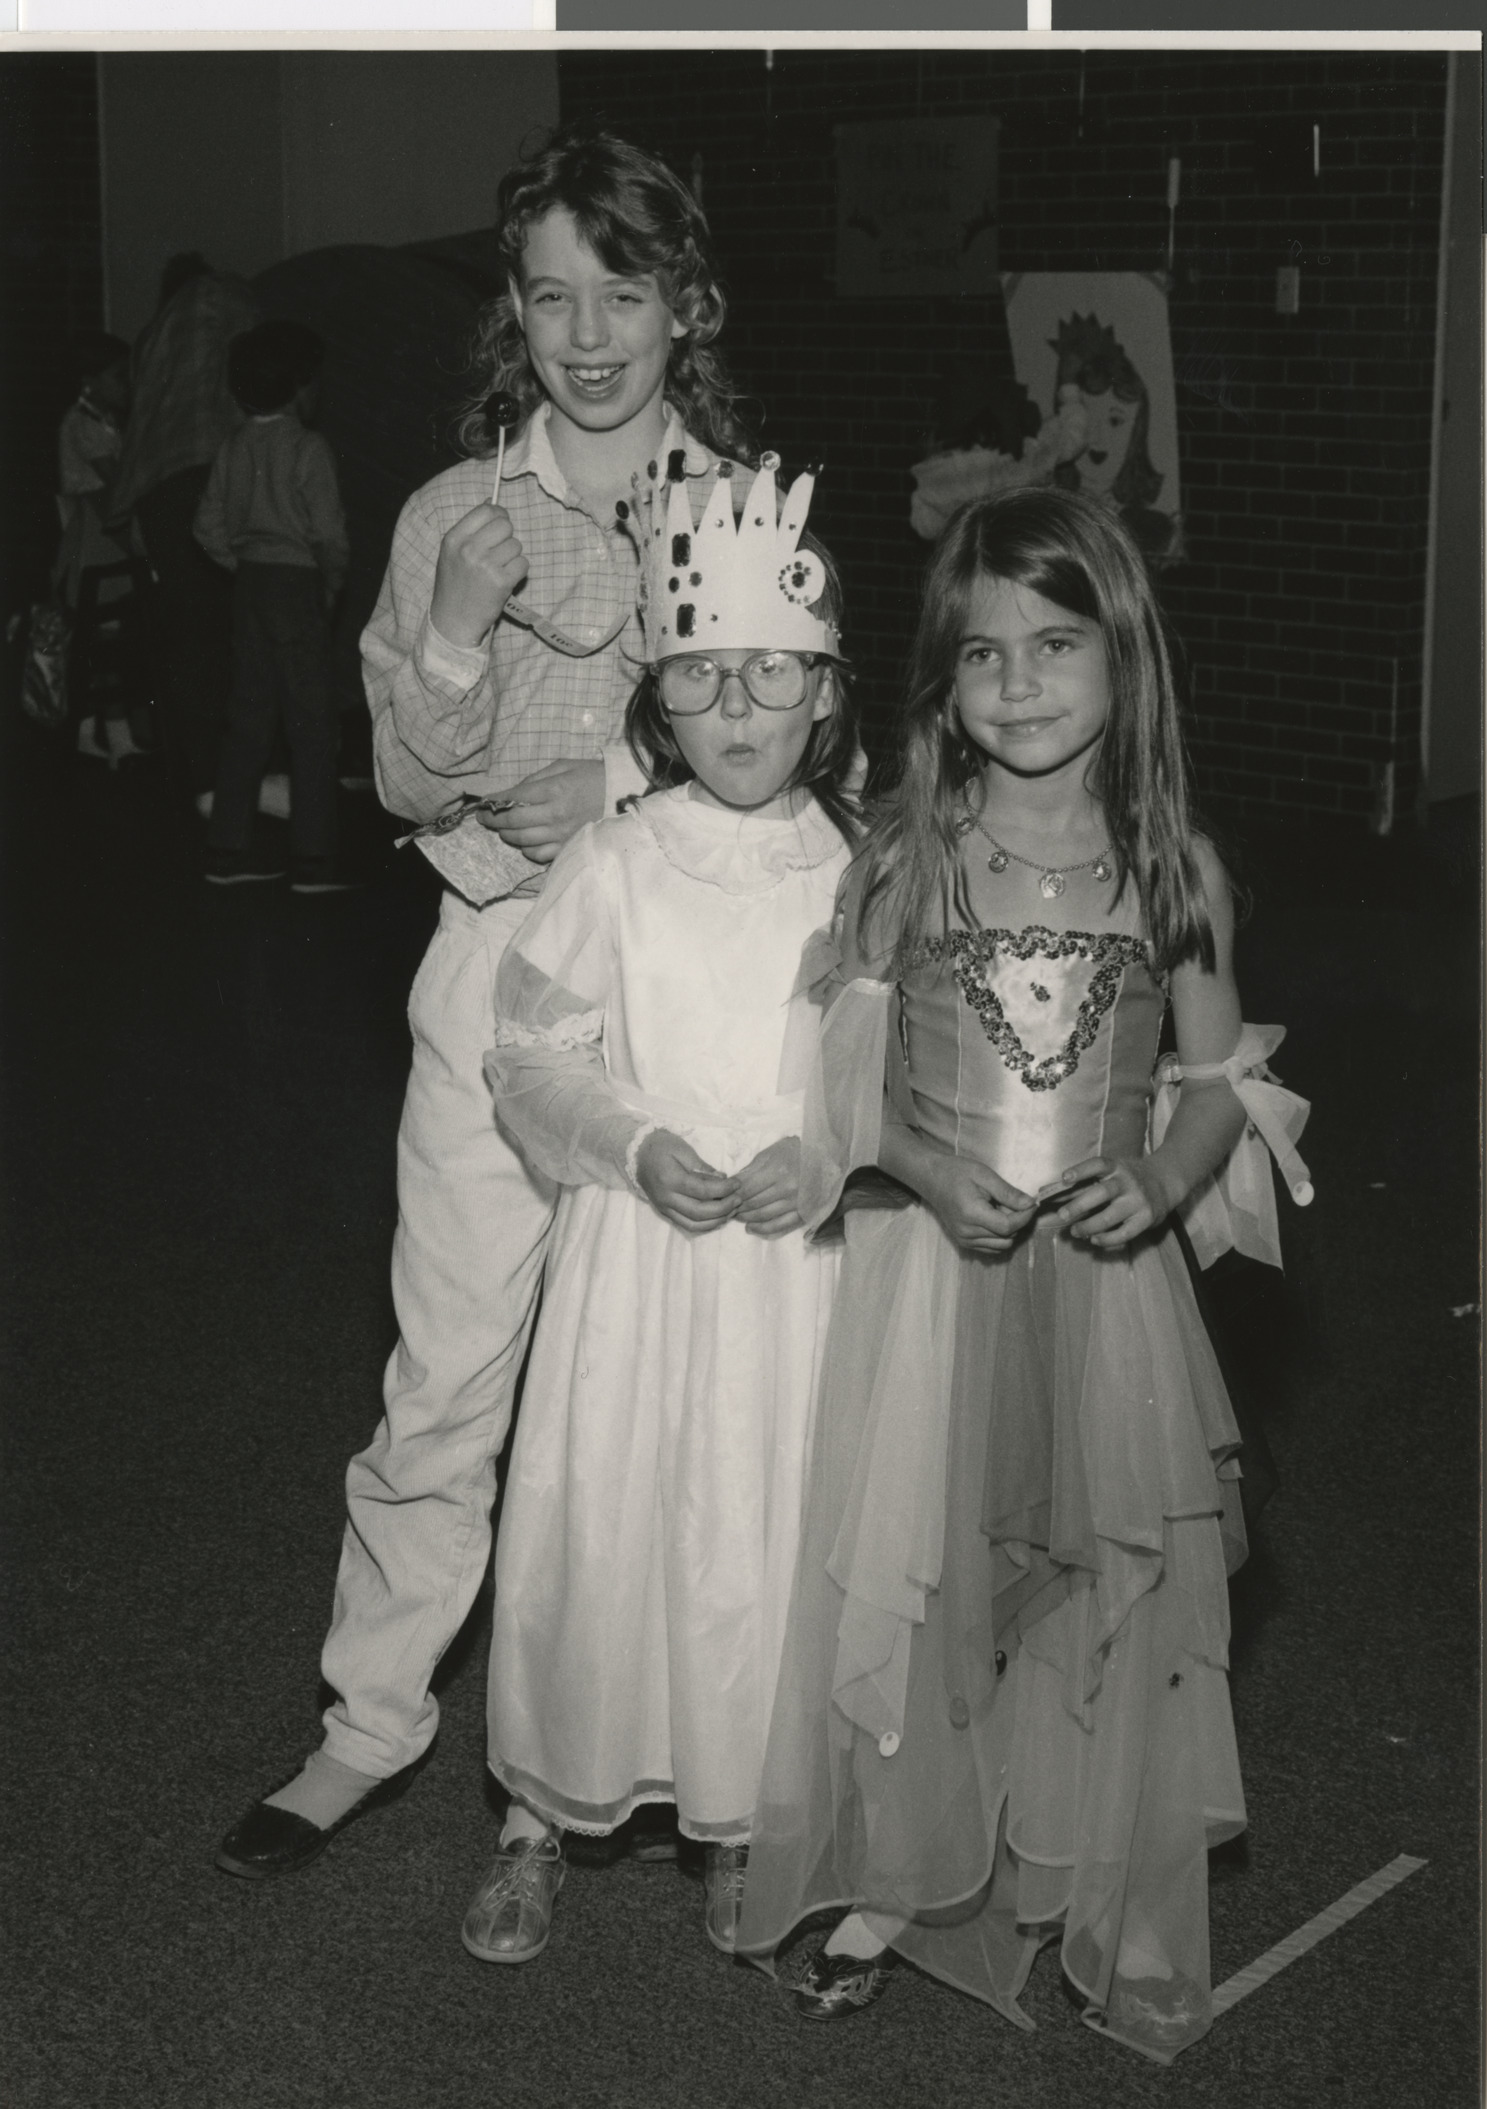 Photograph of Alexis Gould, Staci O'Connell, and Katie Fine, 1980s